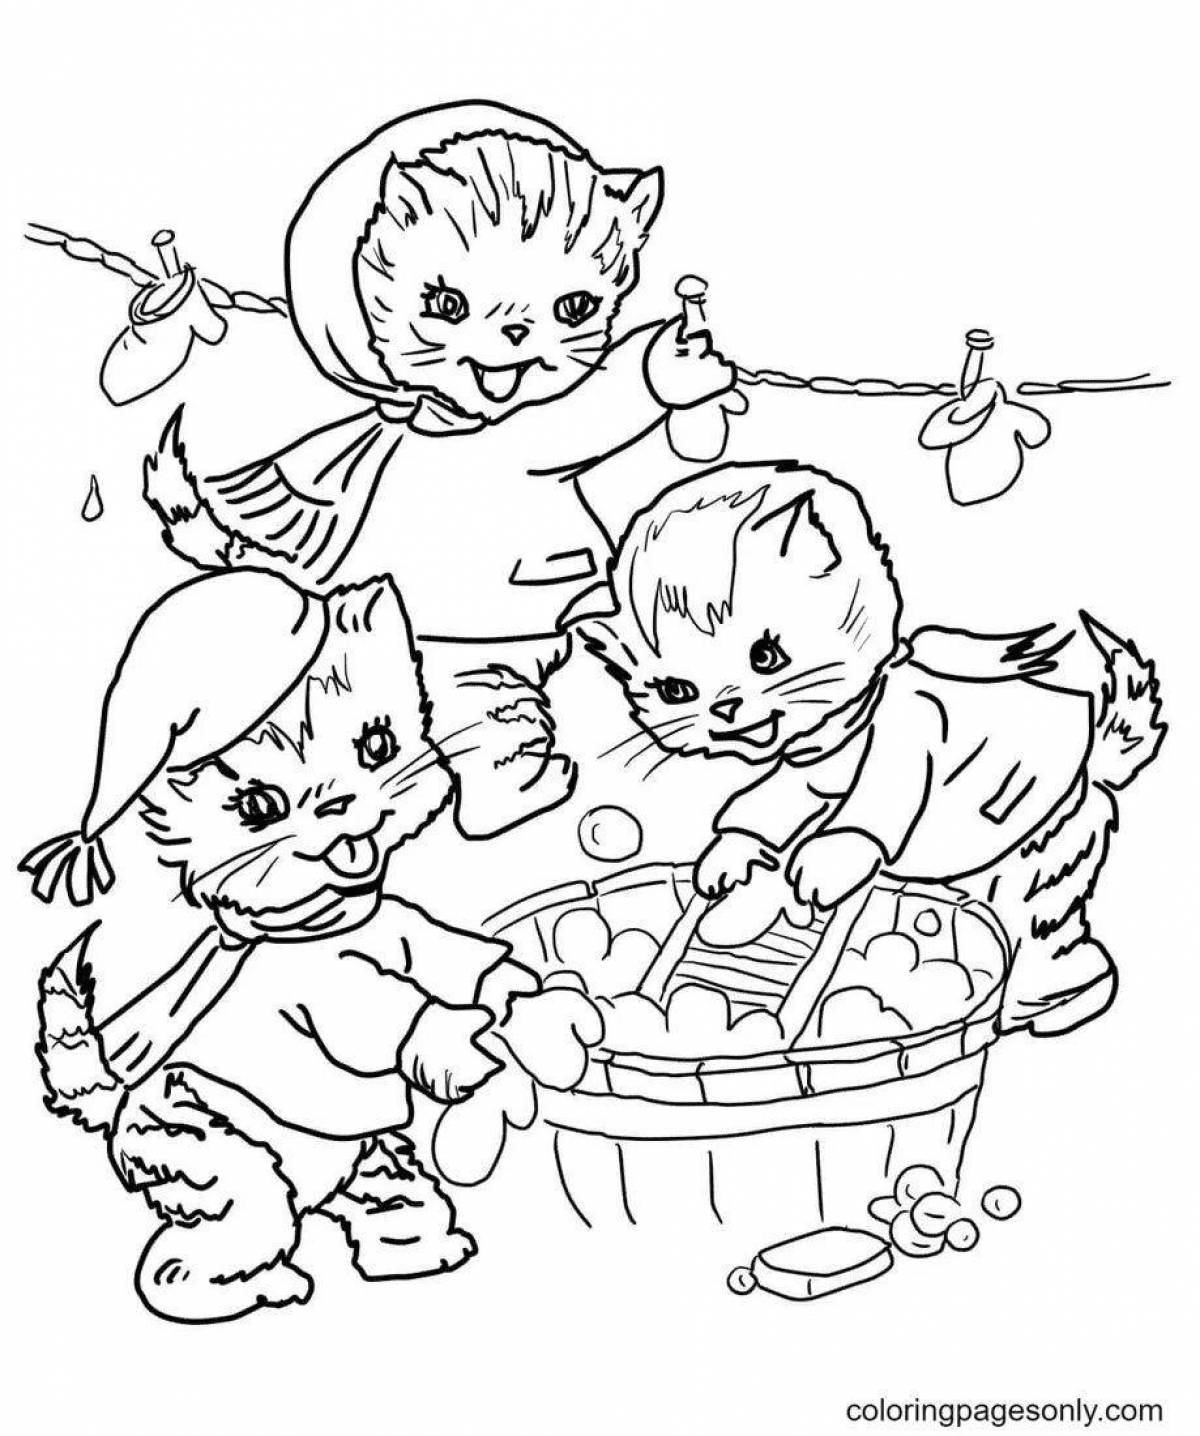 3 kittens amazing coloring book